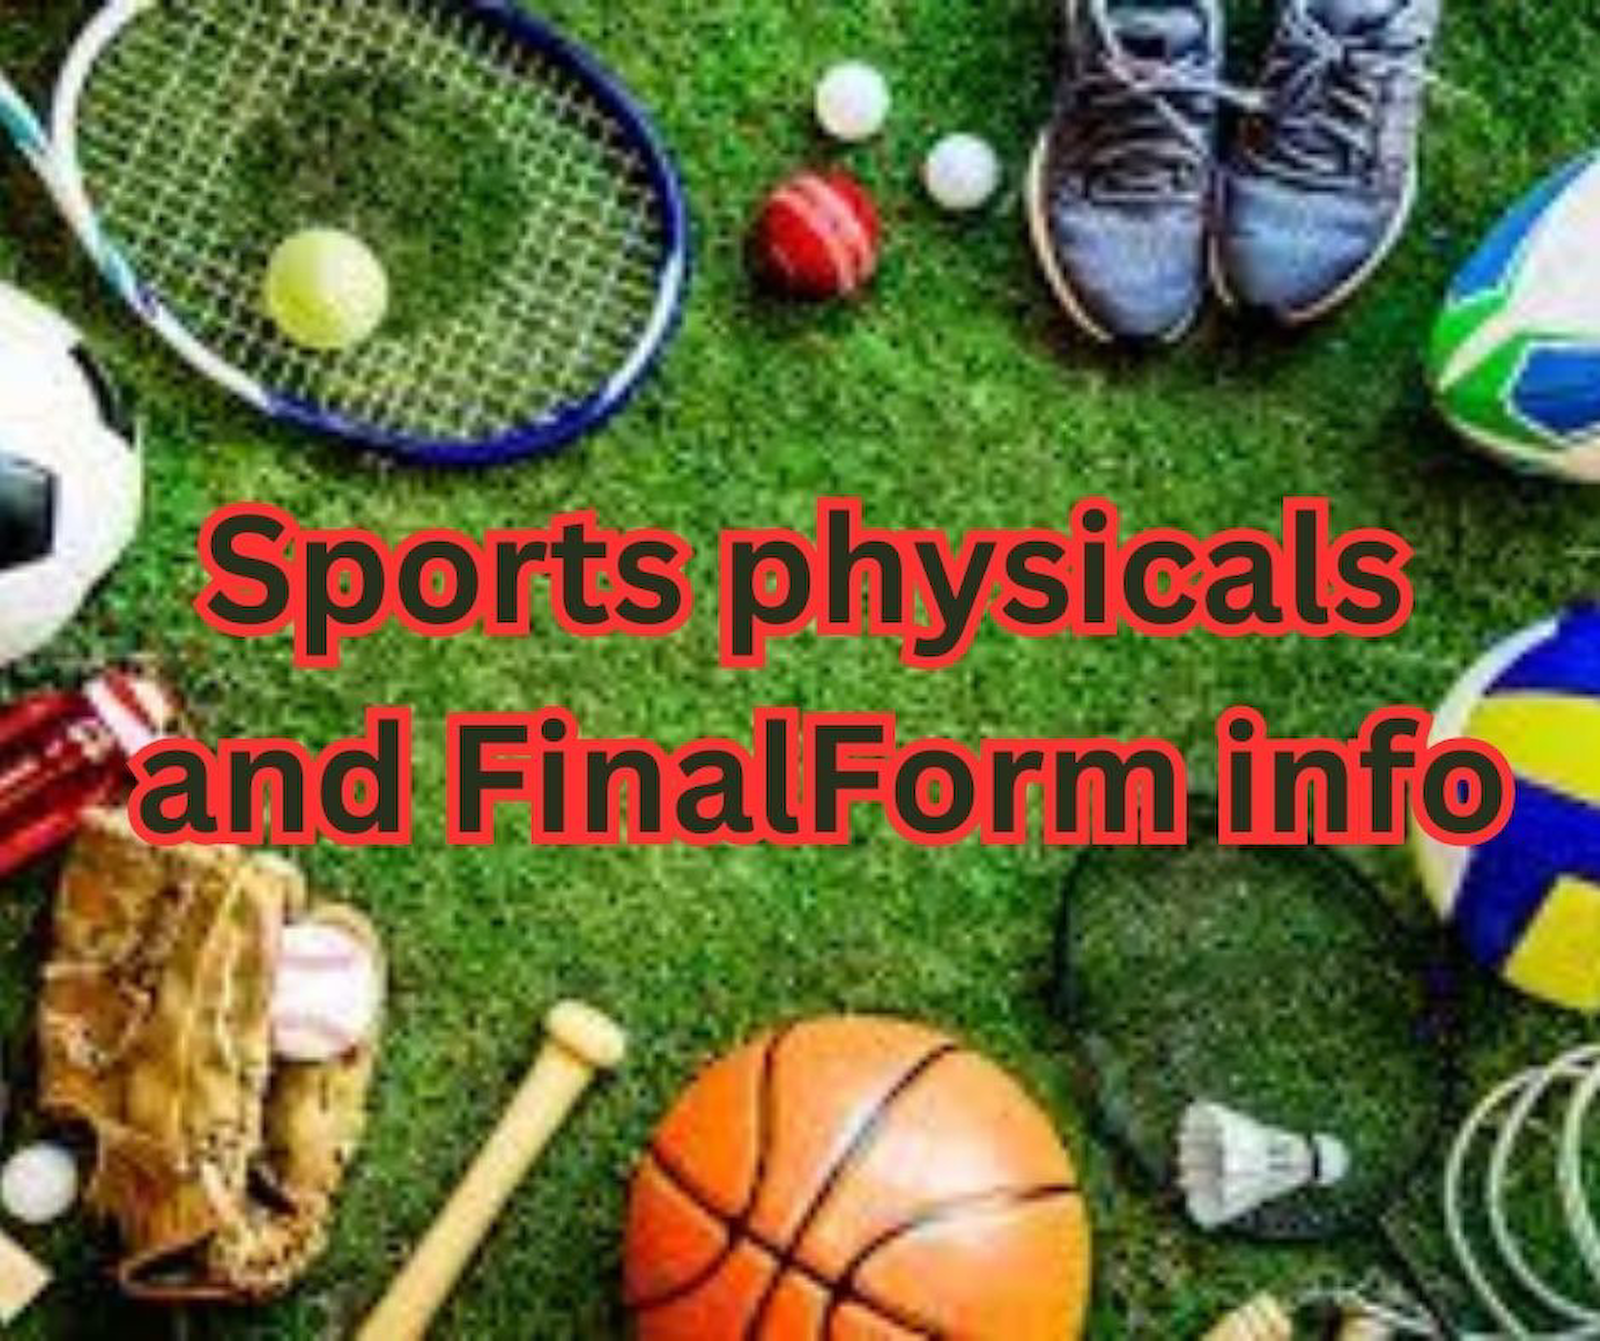 Sports physicals and FinalForm info.png